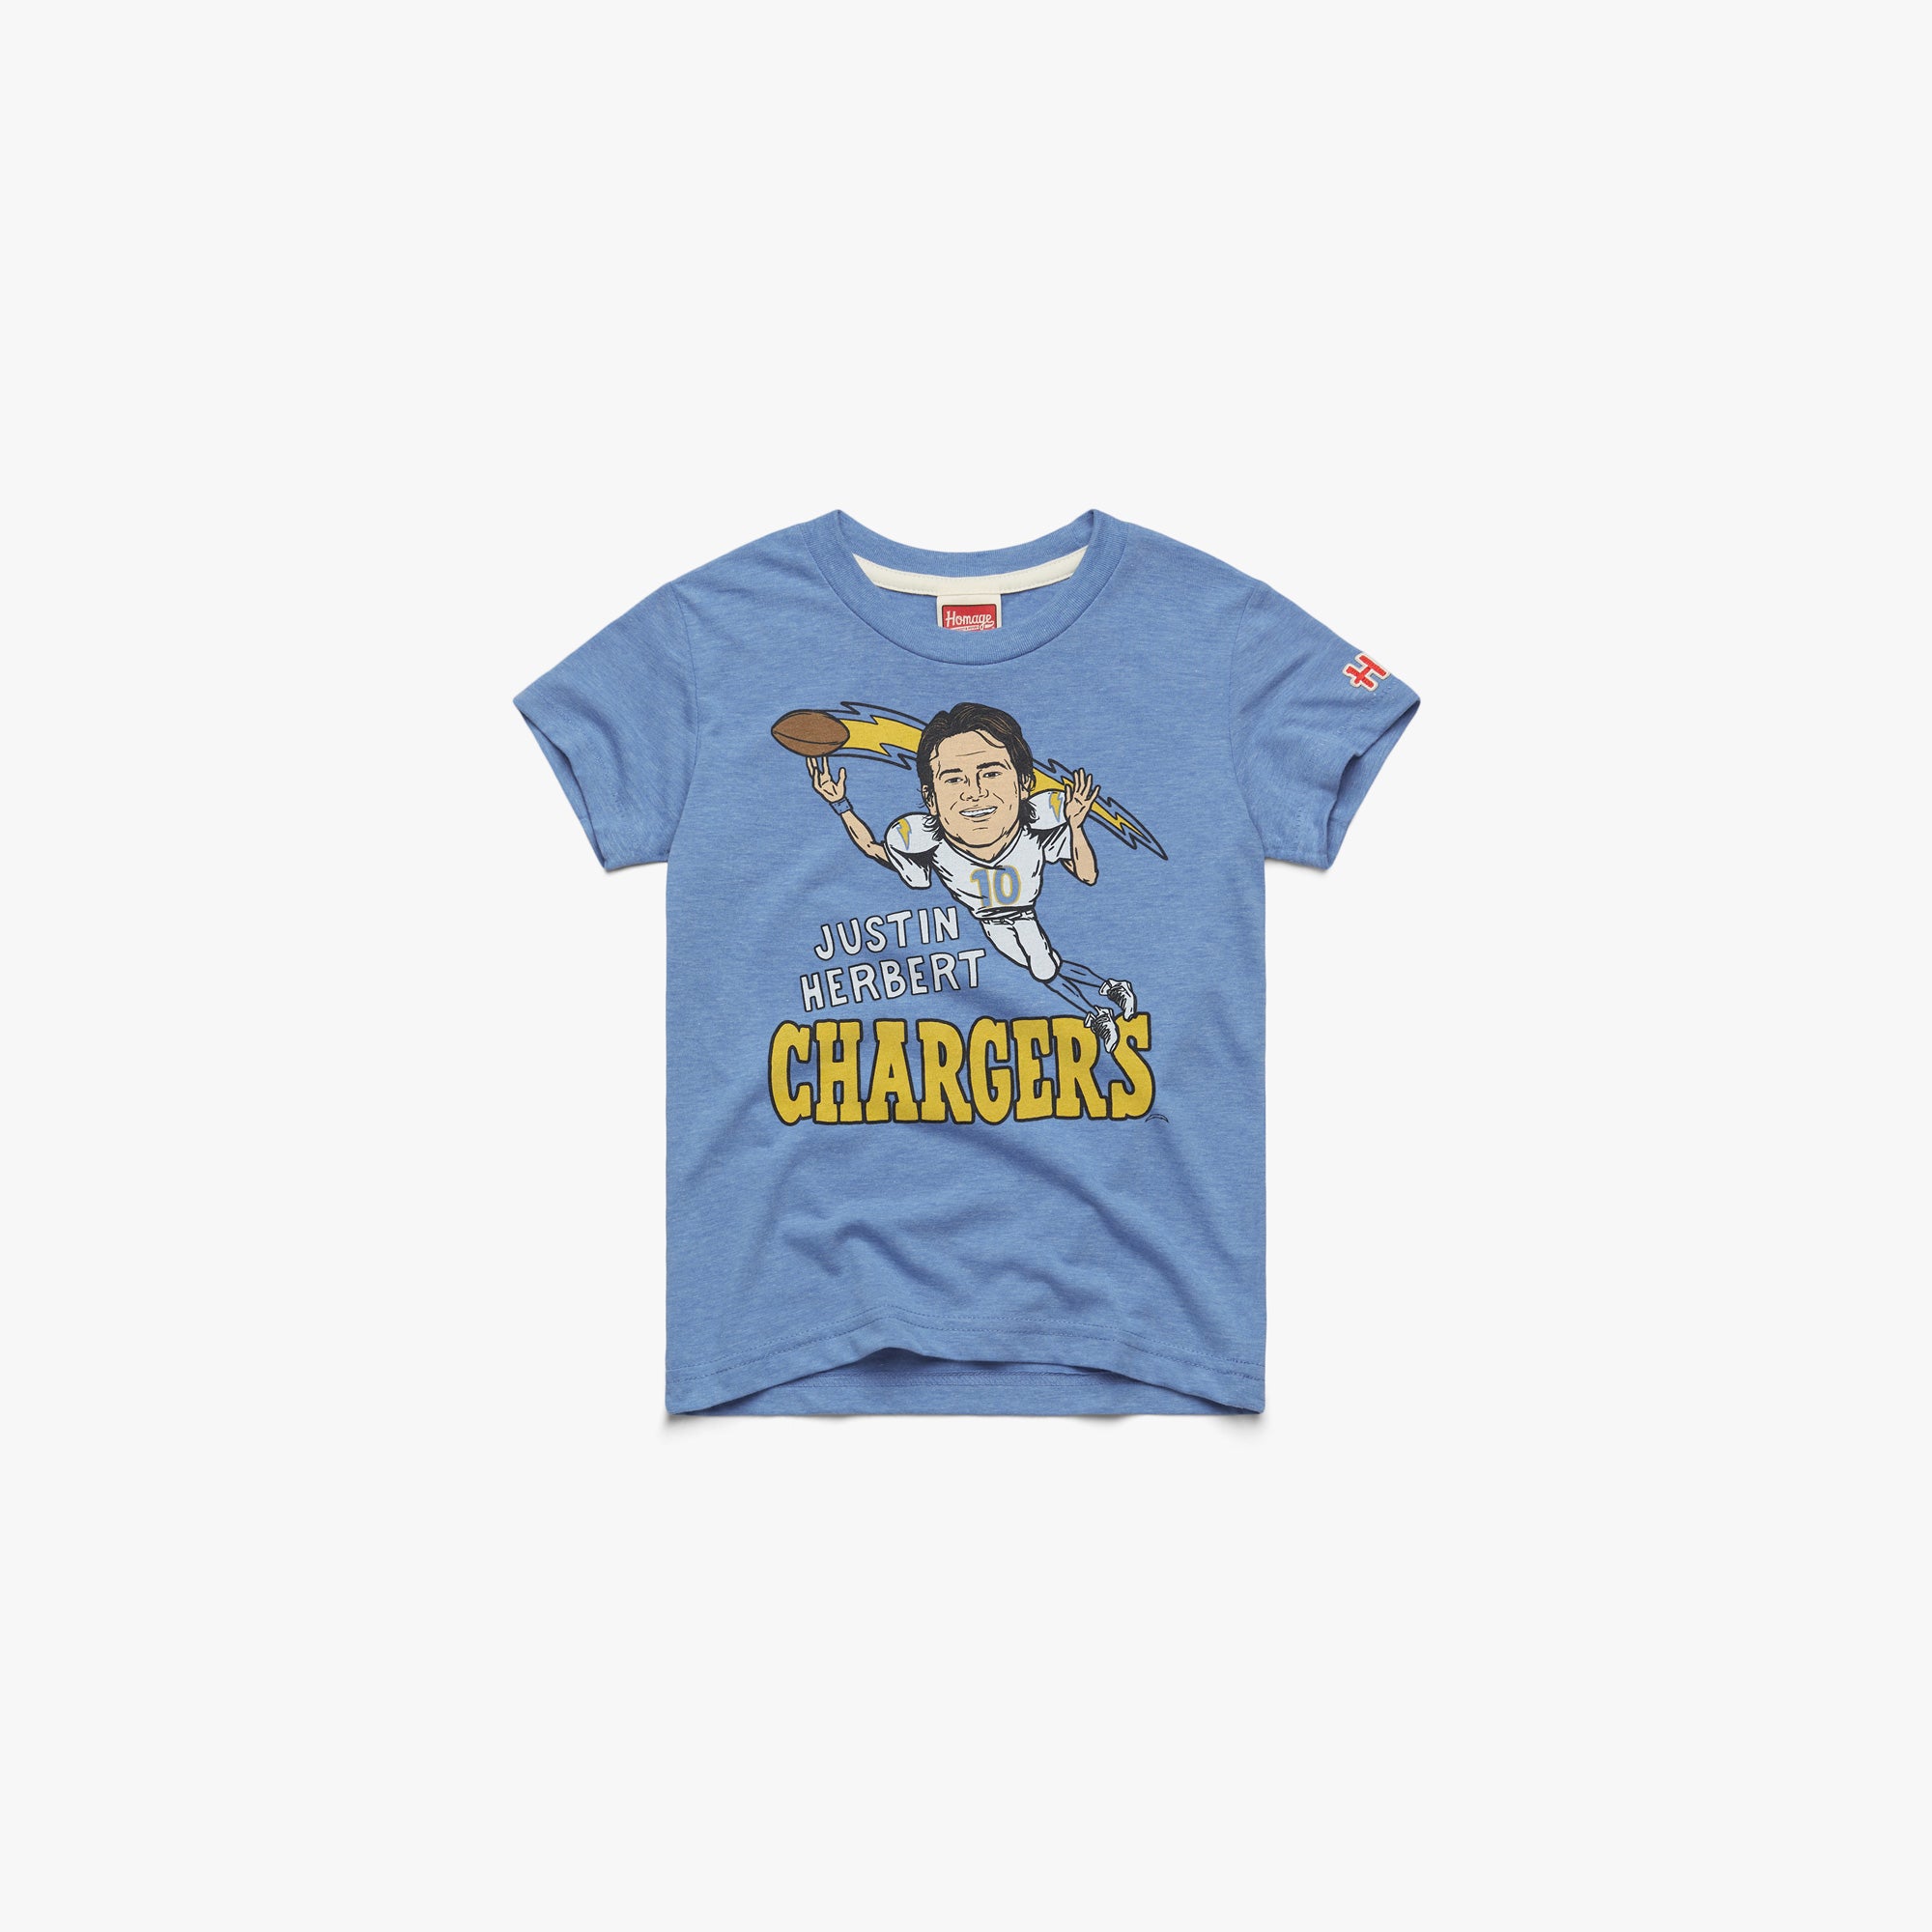 Youth La Los Angeles Chargers Justin Herbert Youth T-Shirt from Homage. | Officially Licensed Vintage NFL Apparel from Homage Pro Shop.